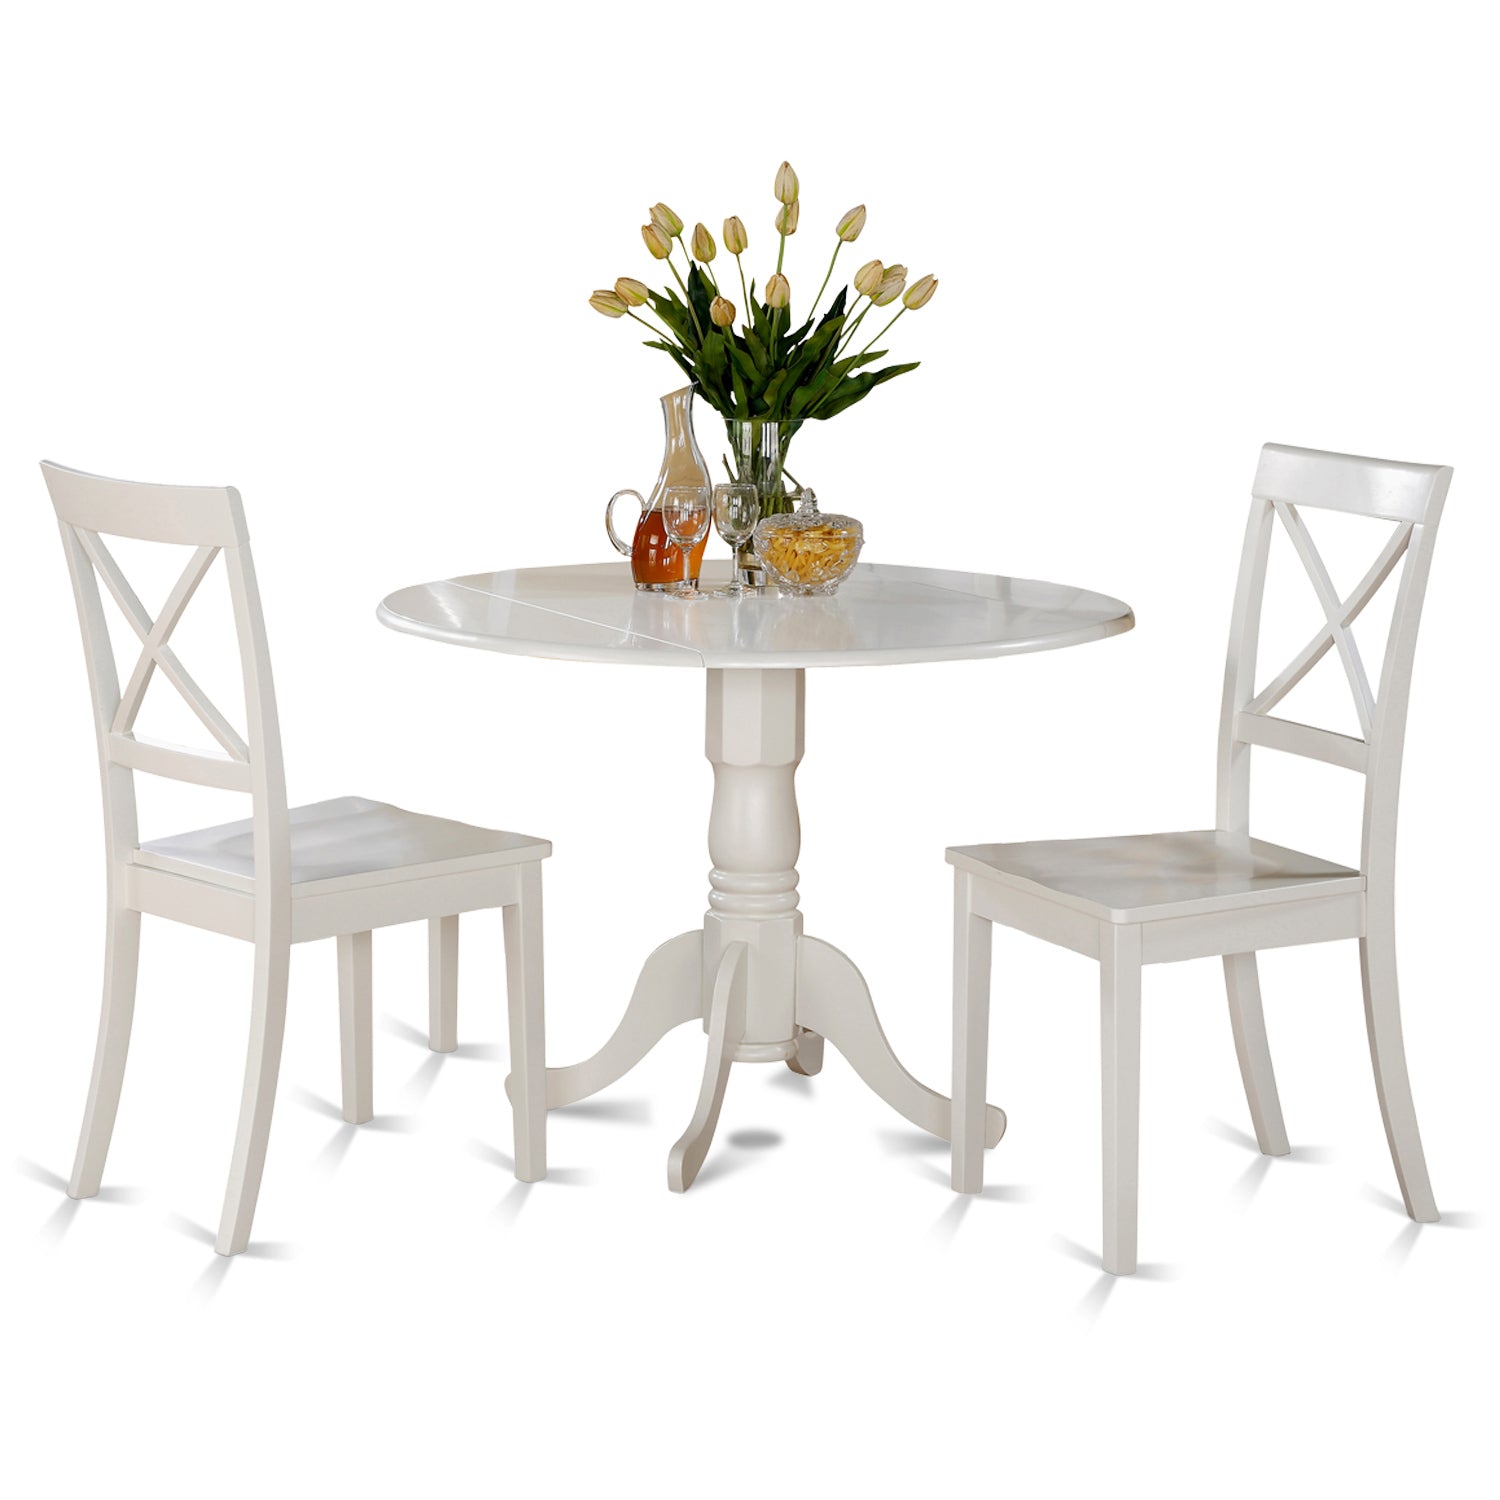 3 PC Dining Dinnette 42" Dropleaf Table and 2 Cross Back Chairs Set in White